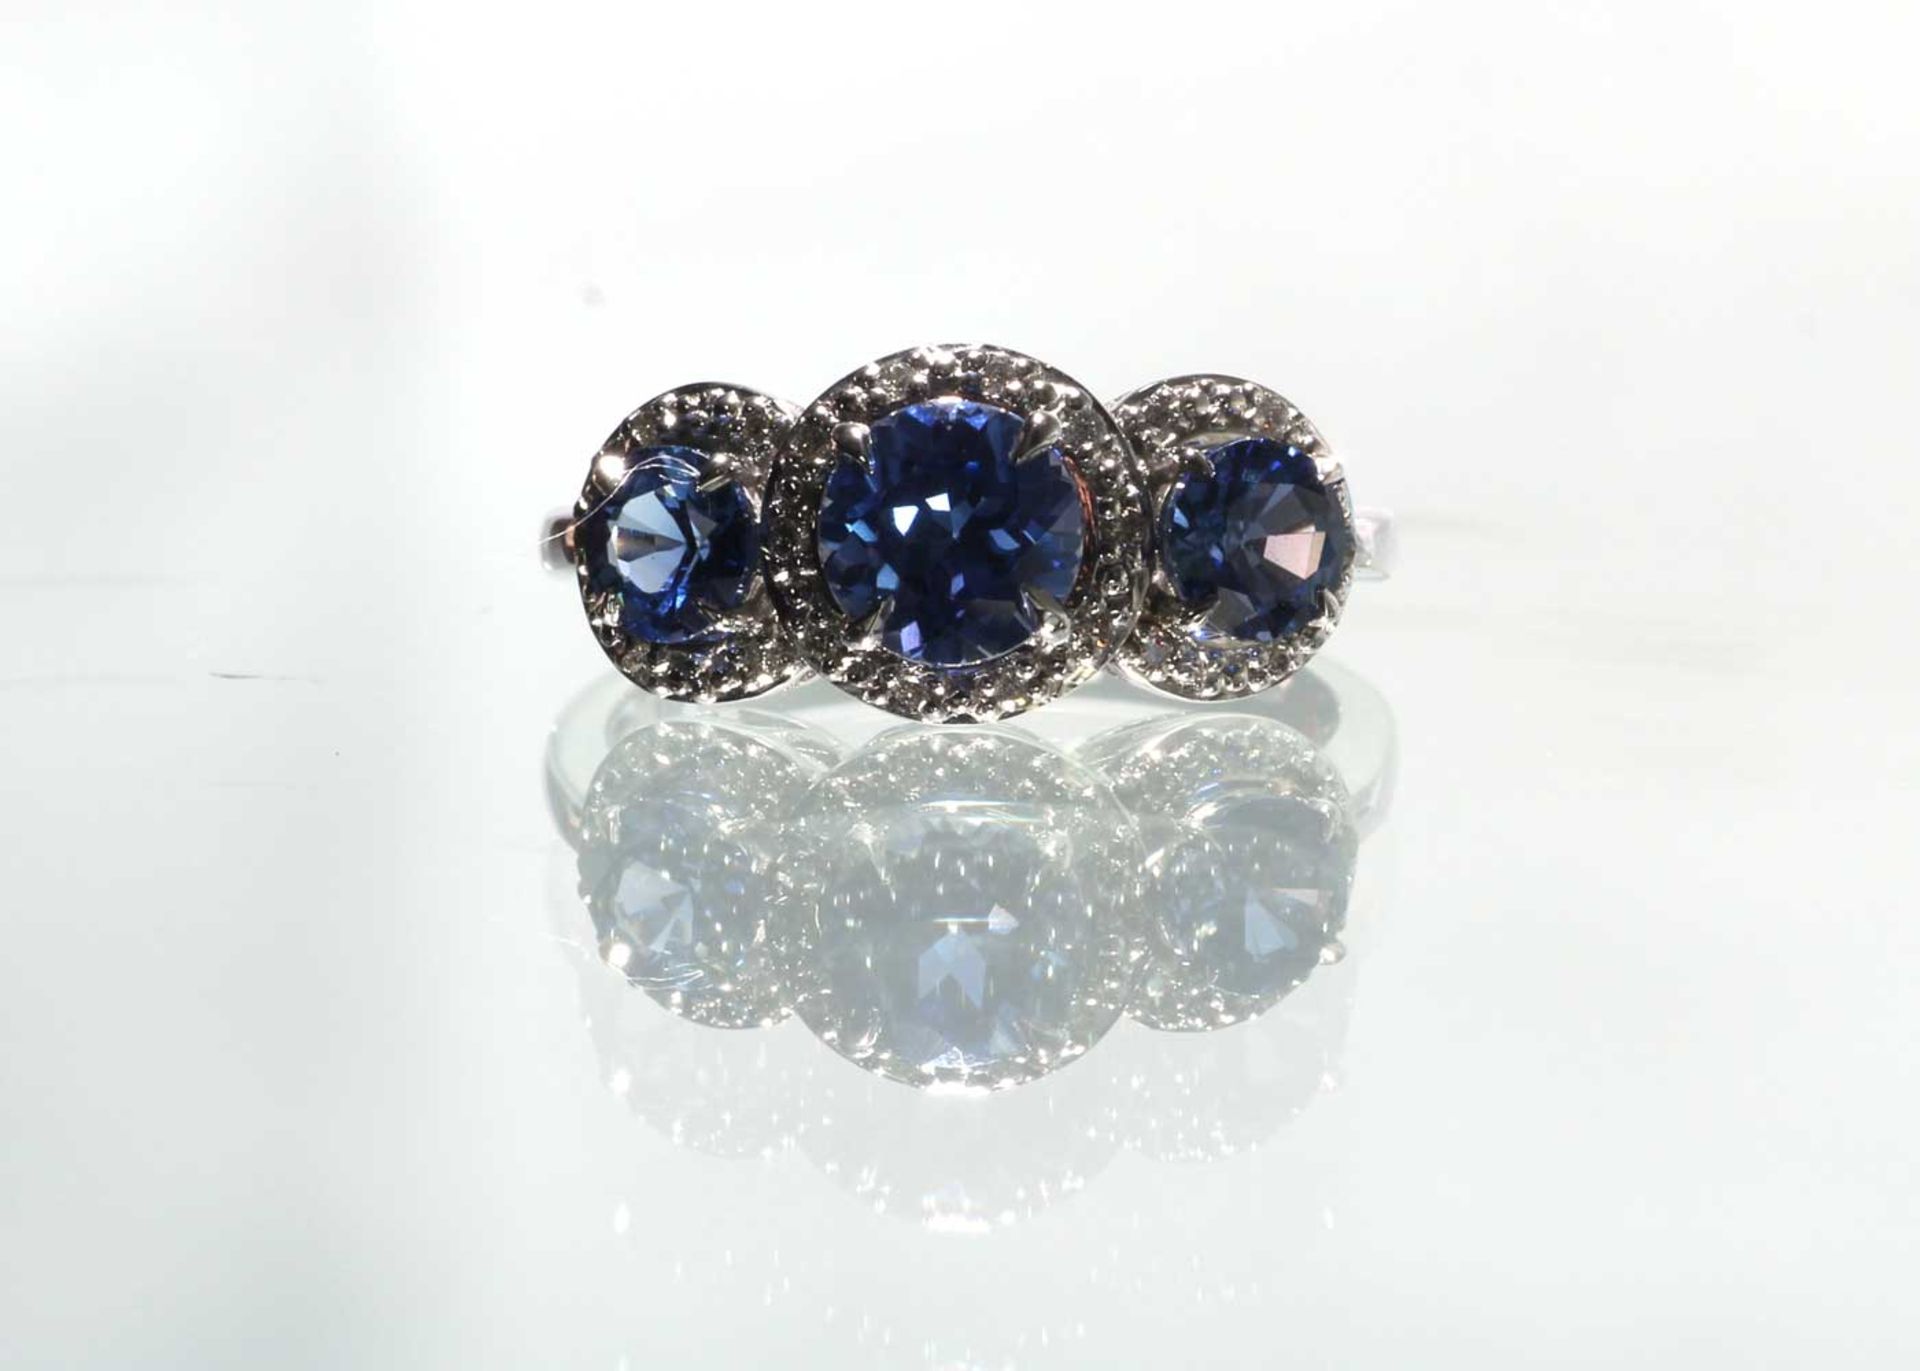 9ct White Gold Created Ceylon Sapphire And Diamond Ring (S2.21) 0.10 Carats - Valued By GIE £2,750. - Image 2 of 6